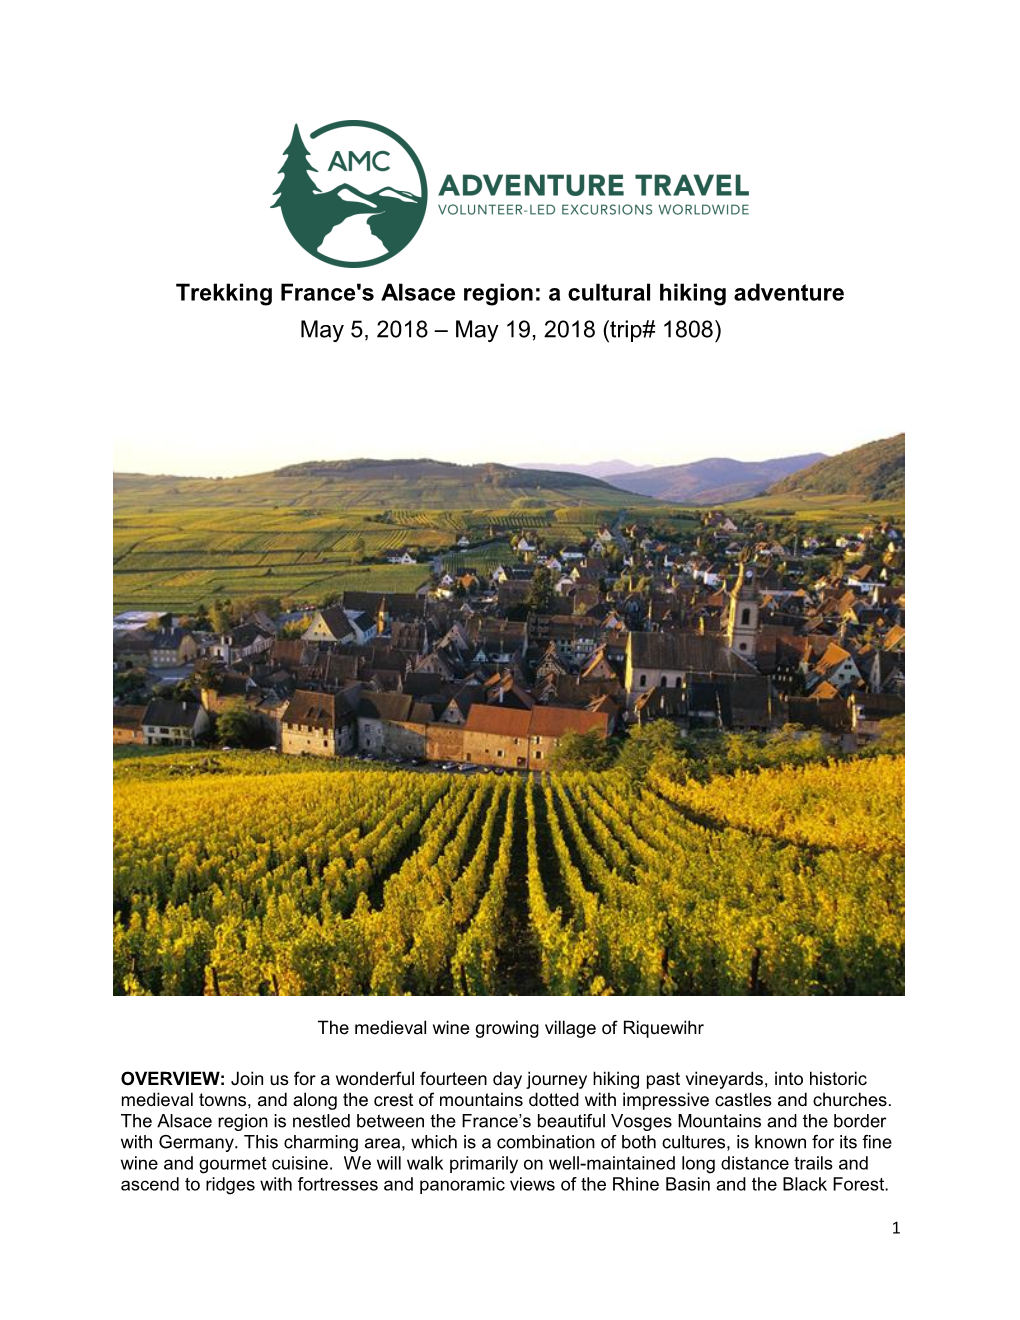 Trekking France's Alsace Region: a Cultural Hiking Adventure May 5, 2018 – May 19, 2018 (Trip# 1808)